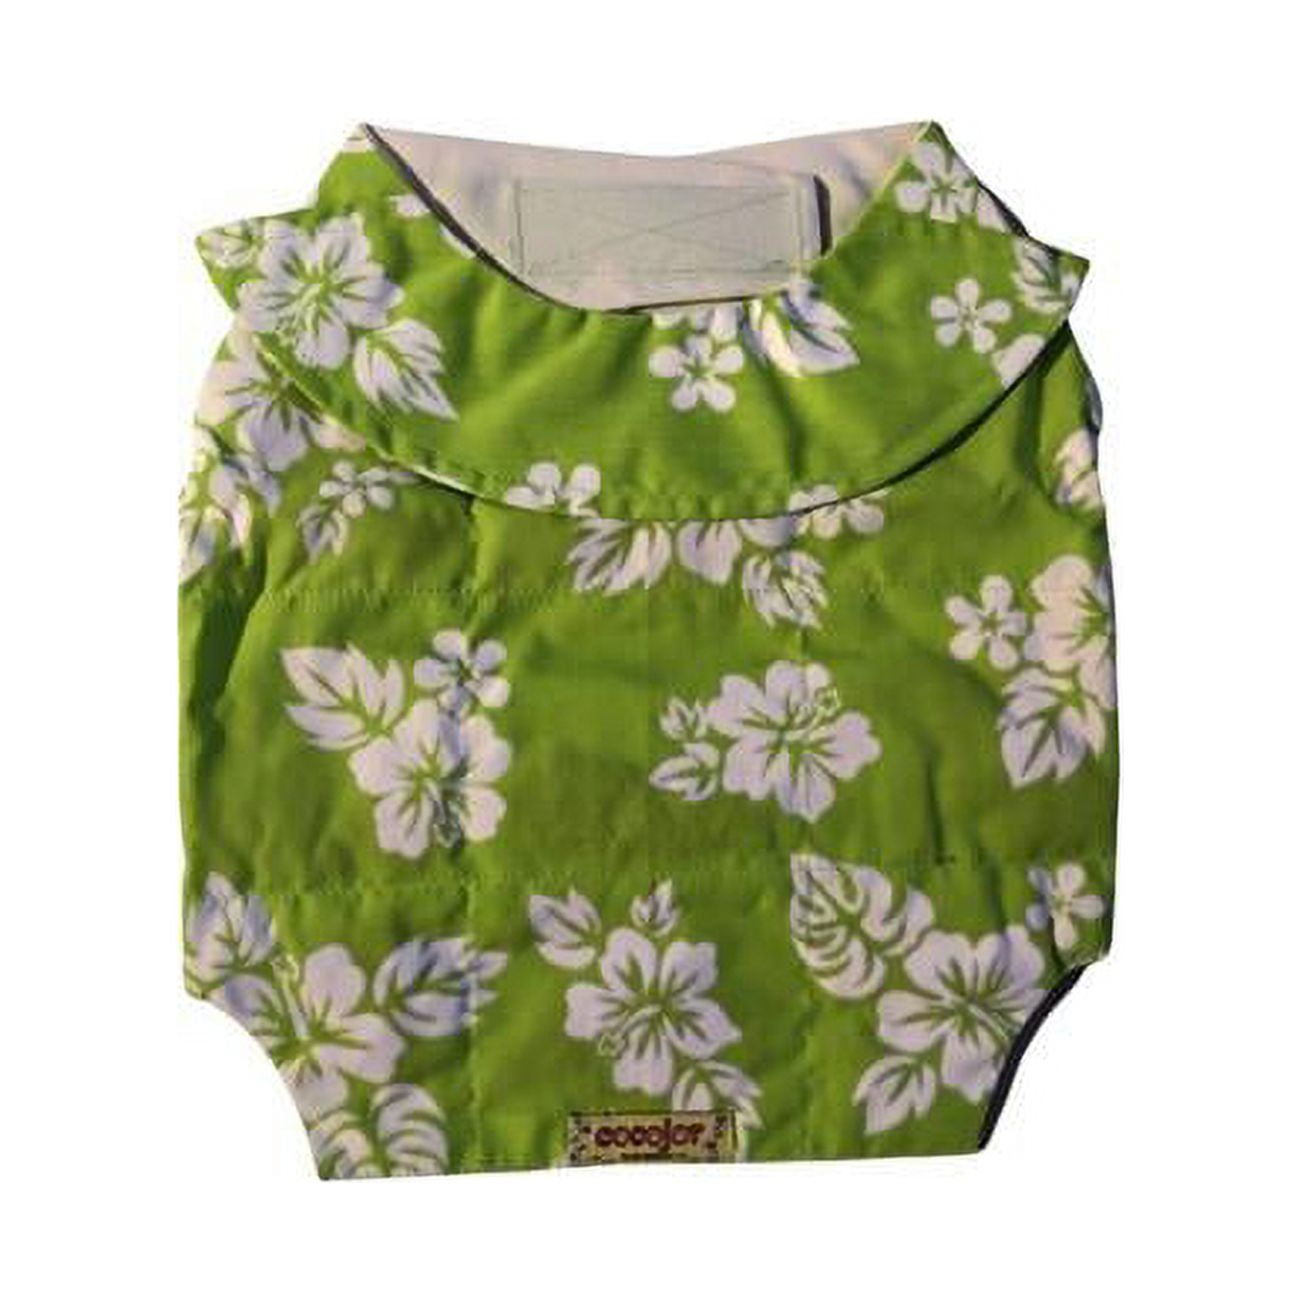 Picture of Cocojor GRN12C354 Hawaii 5-0 Cooling Vest for Dog, Green - Extra Small